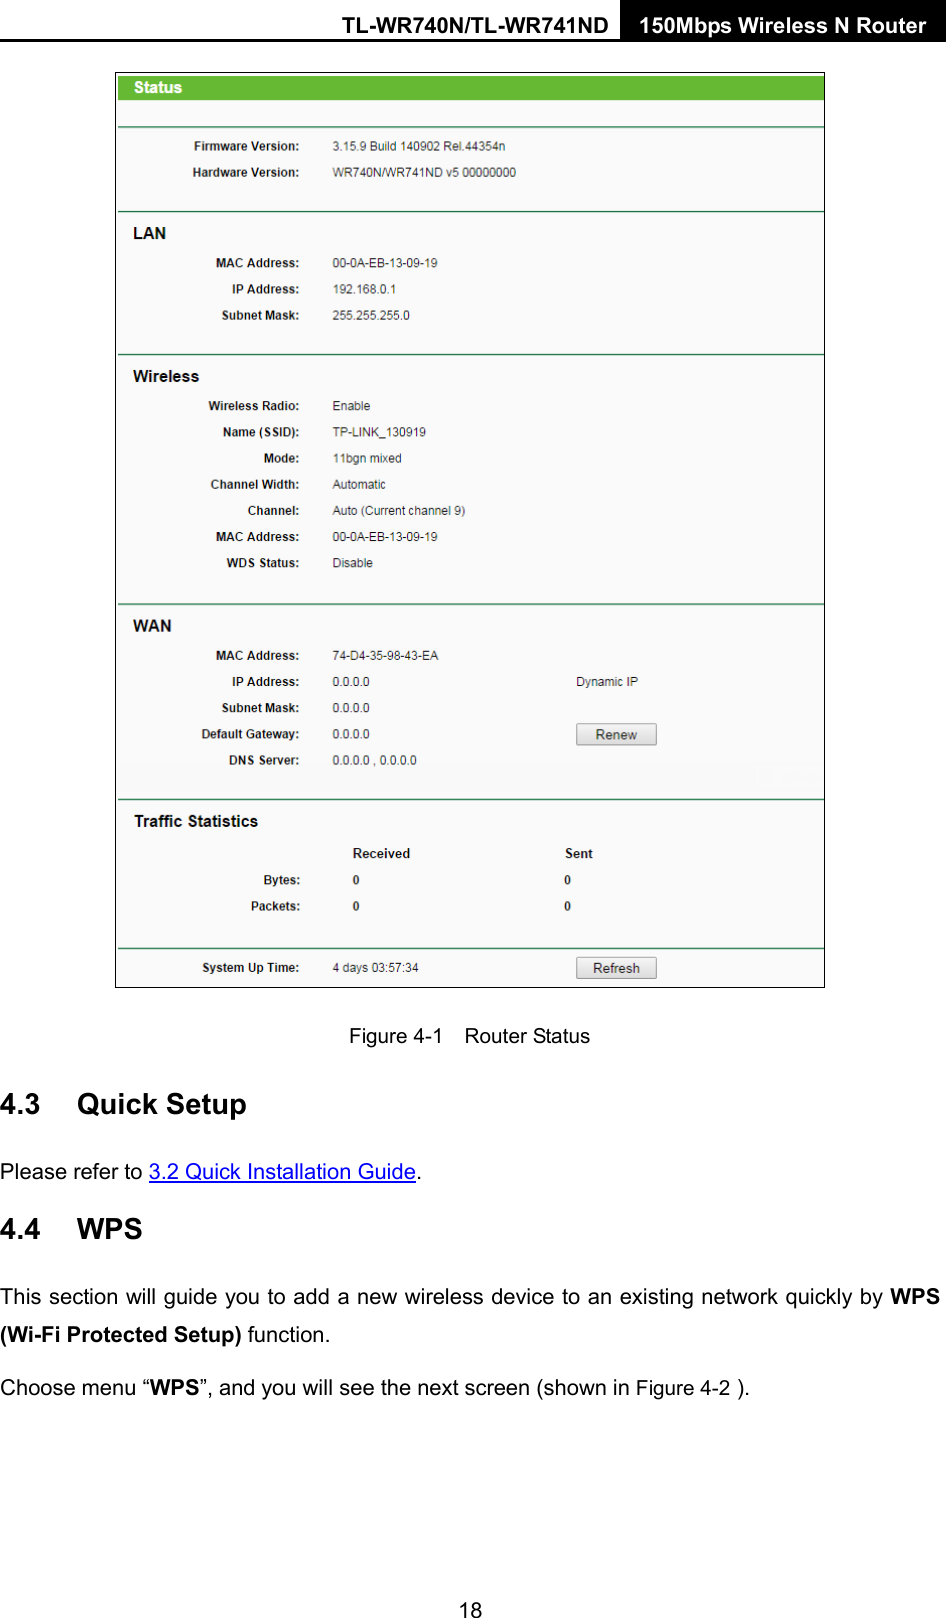 TL-WR740N/TL-WR741ND 150Mbps Wireless N Router   Figure 4-1  Router Status 4.3 Quick Setup Please refer to 3.2 Quick Installation Guide. 4.4 WPS This section will guide you to add a new wireless device to an existing network quickly by WPS (Wi-Fi Protected Setup) function.   Choose menu “WPS”, and you will see the next screen (shown in Figure 4-2 ). 18 